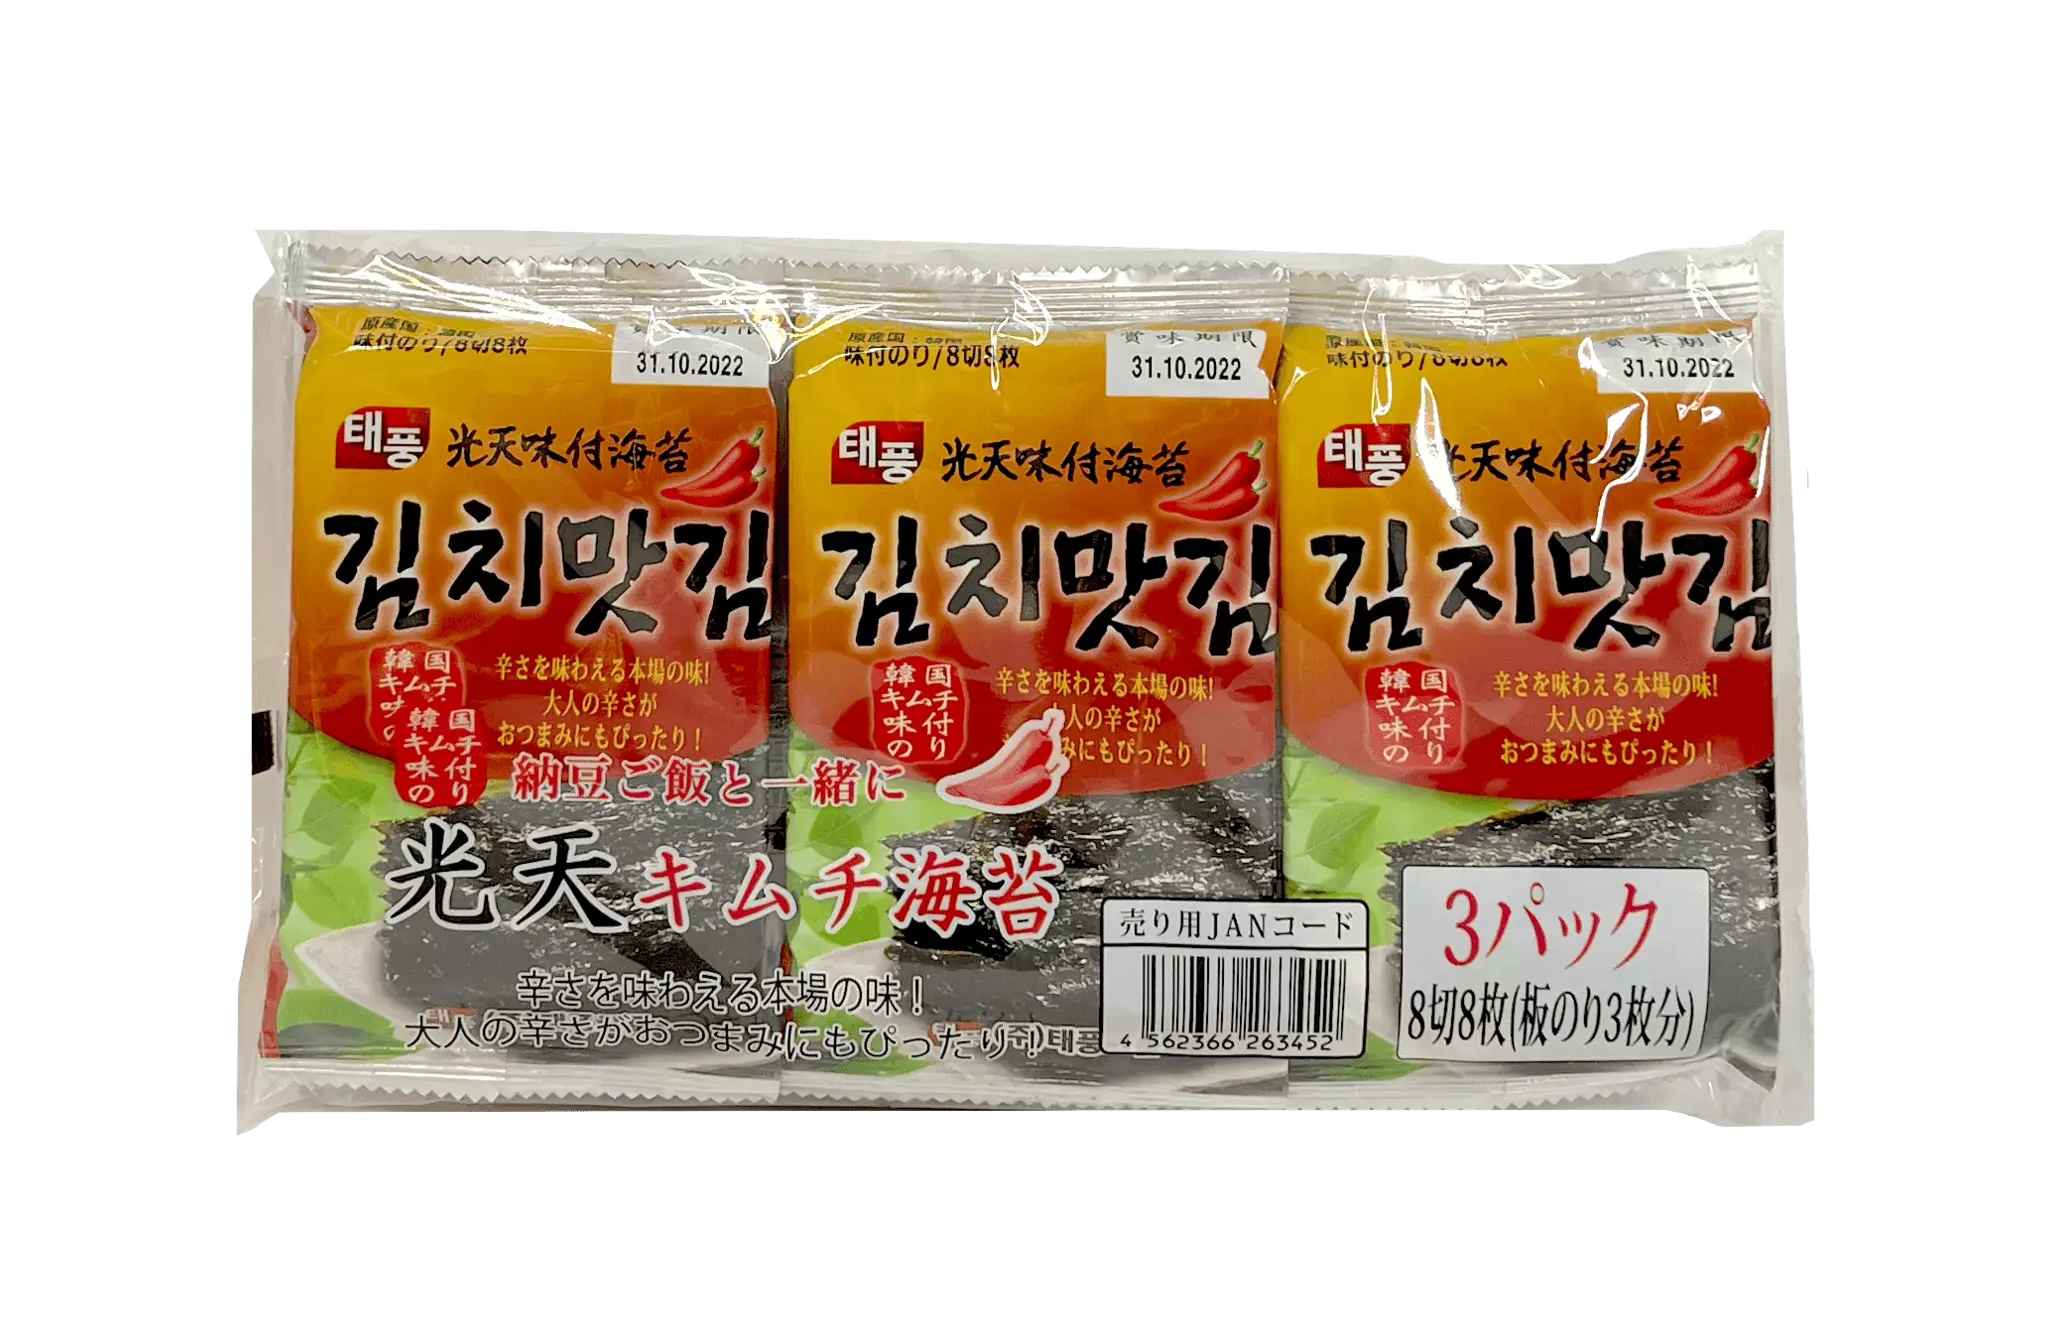 Crispy Seagrass Roasted With Kimchi Flavour (4gx3pcs) NH Korean